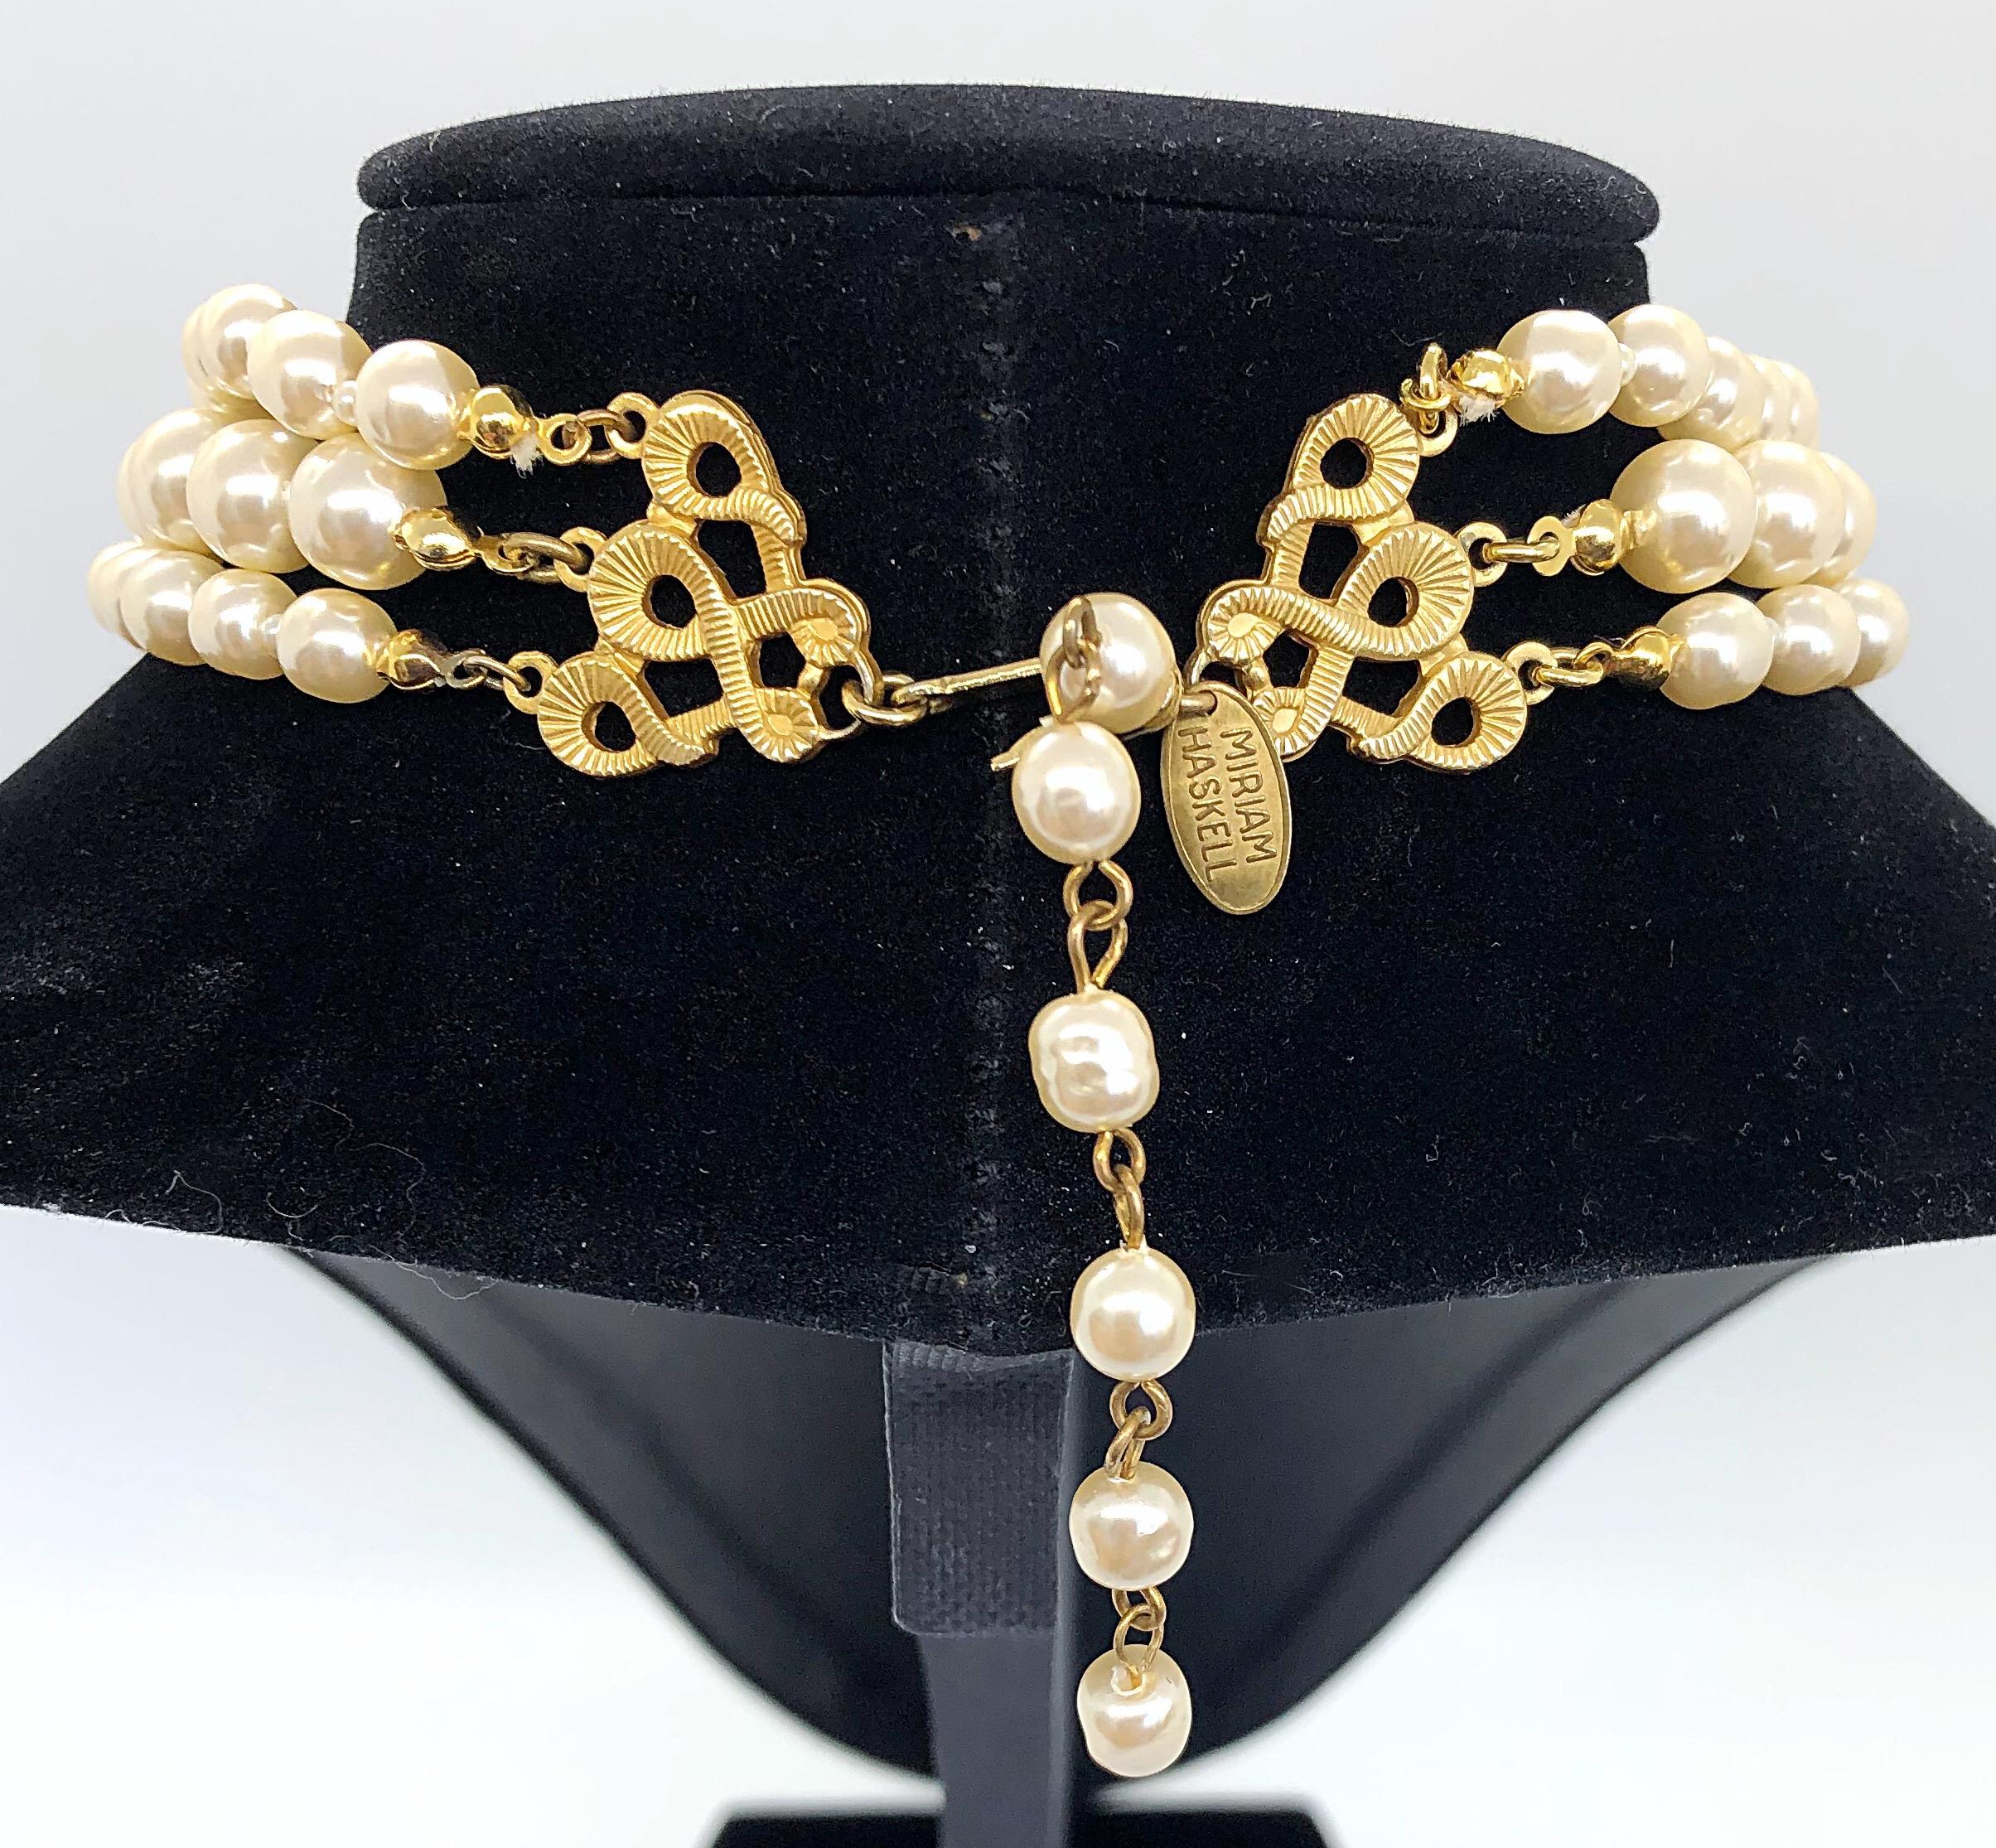 Spectacular vintage 50s signed MIRIAM HASKELL triple strand freshwater faux pearl choker necklace! Features three strands of ivory colored graduated pearls. The center focal pendant is a signature large flower embellished with hand-sewn seed pearls